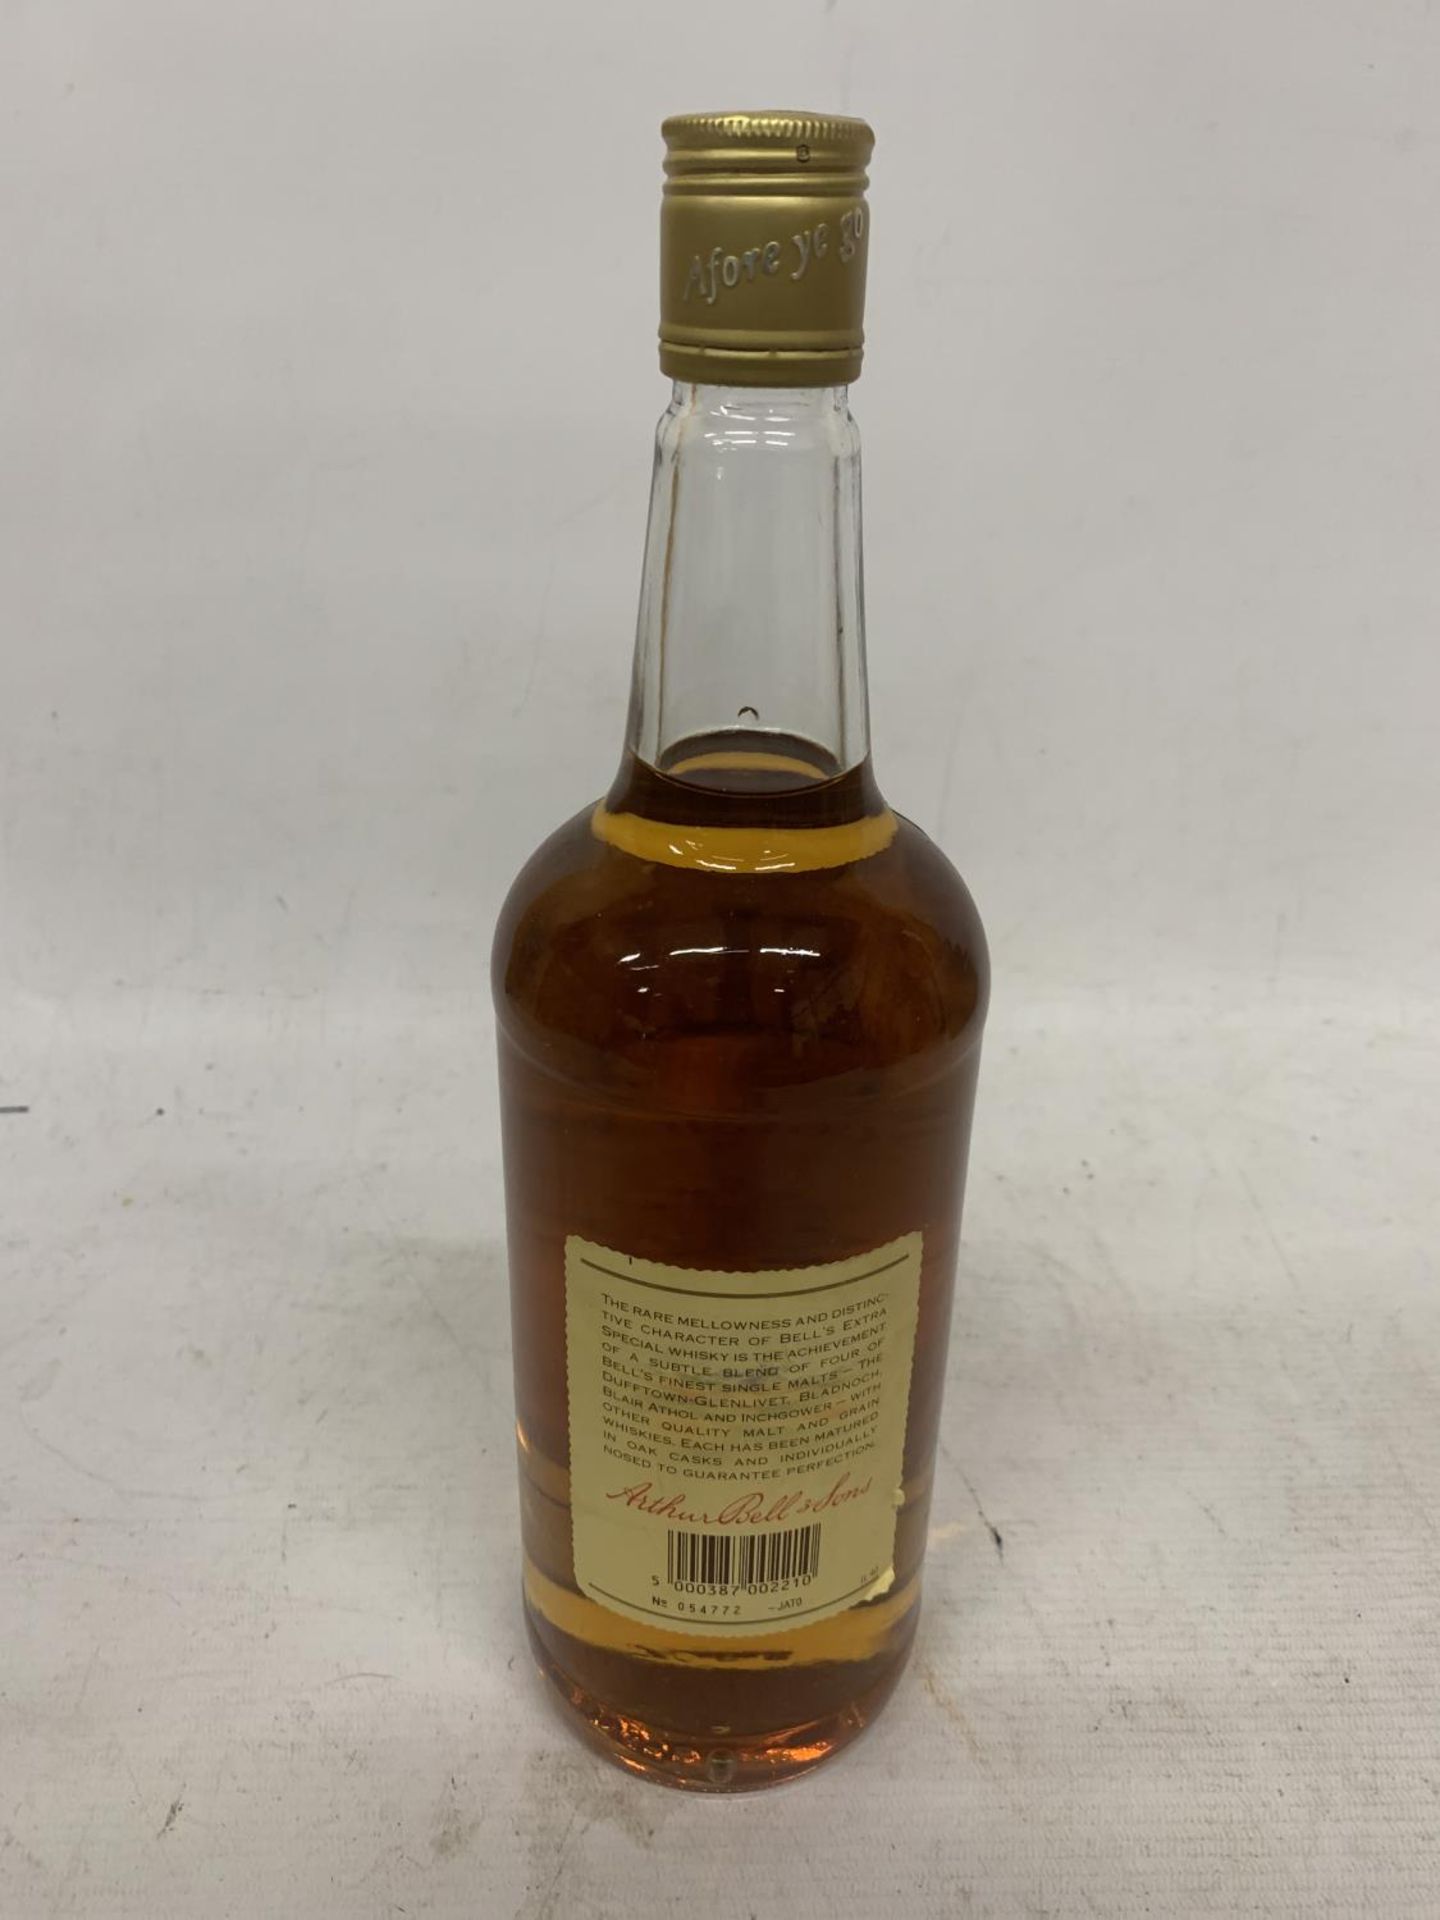 A 1 LITRE BOTTLE OF BELL'S SCOTCH WHISKY - Image 2 of 2